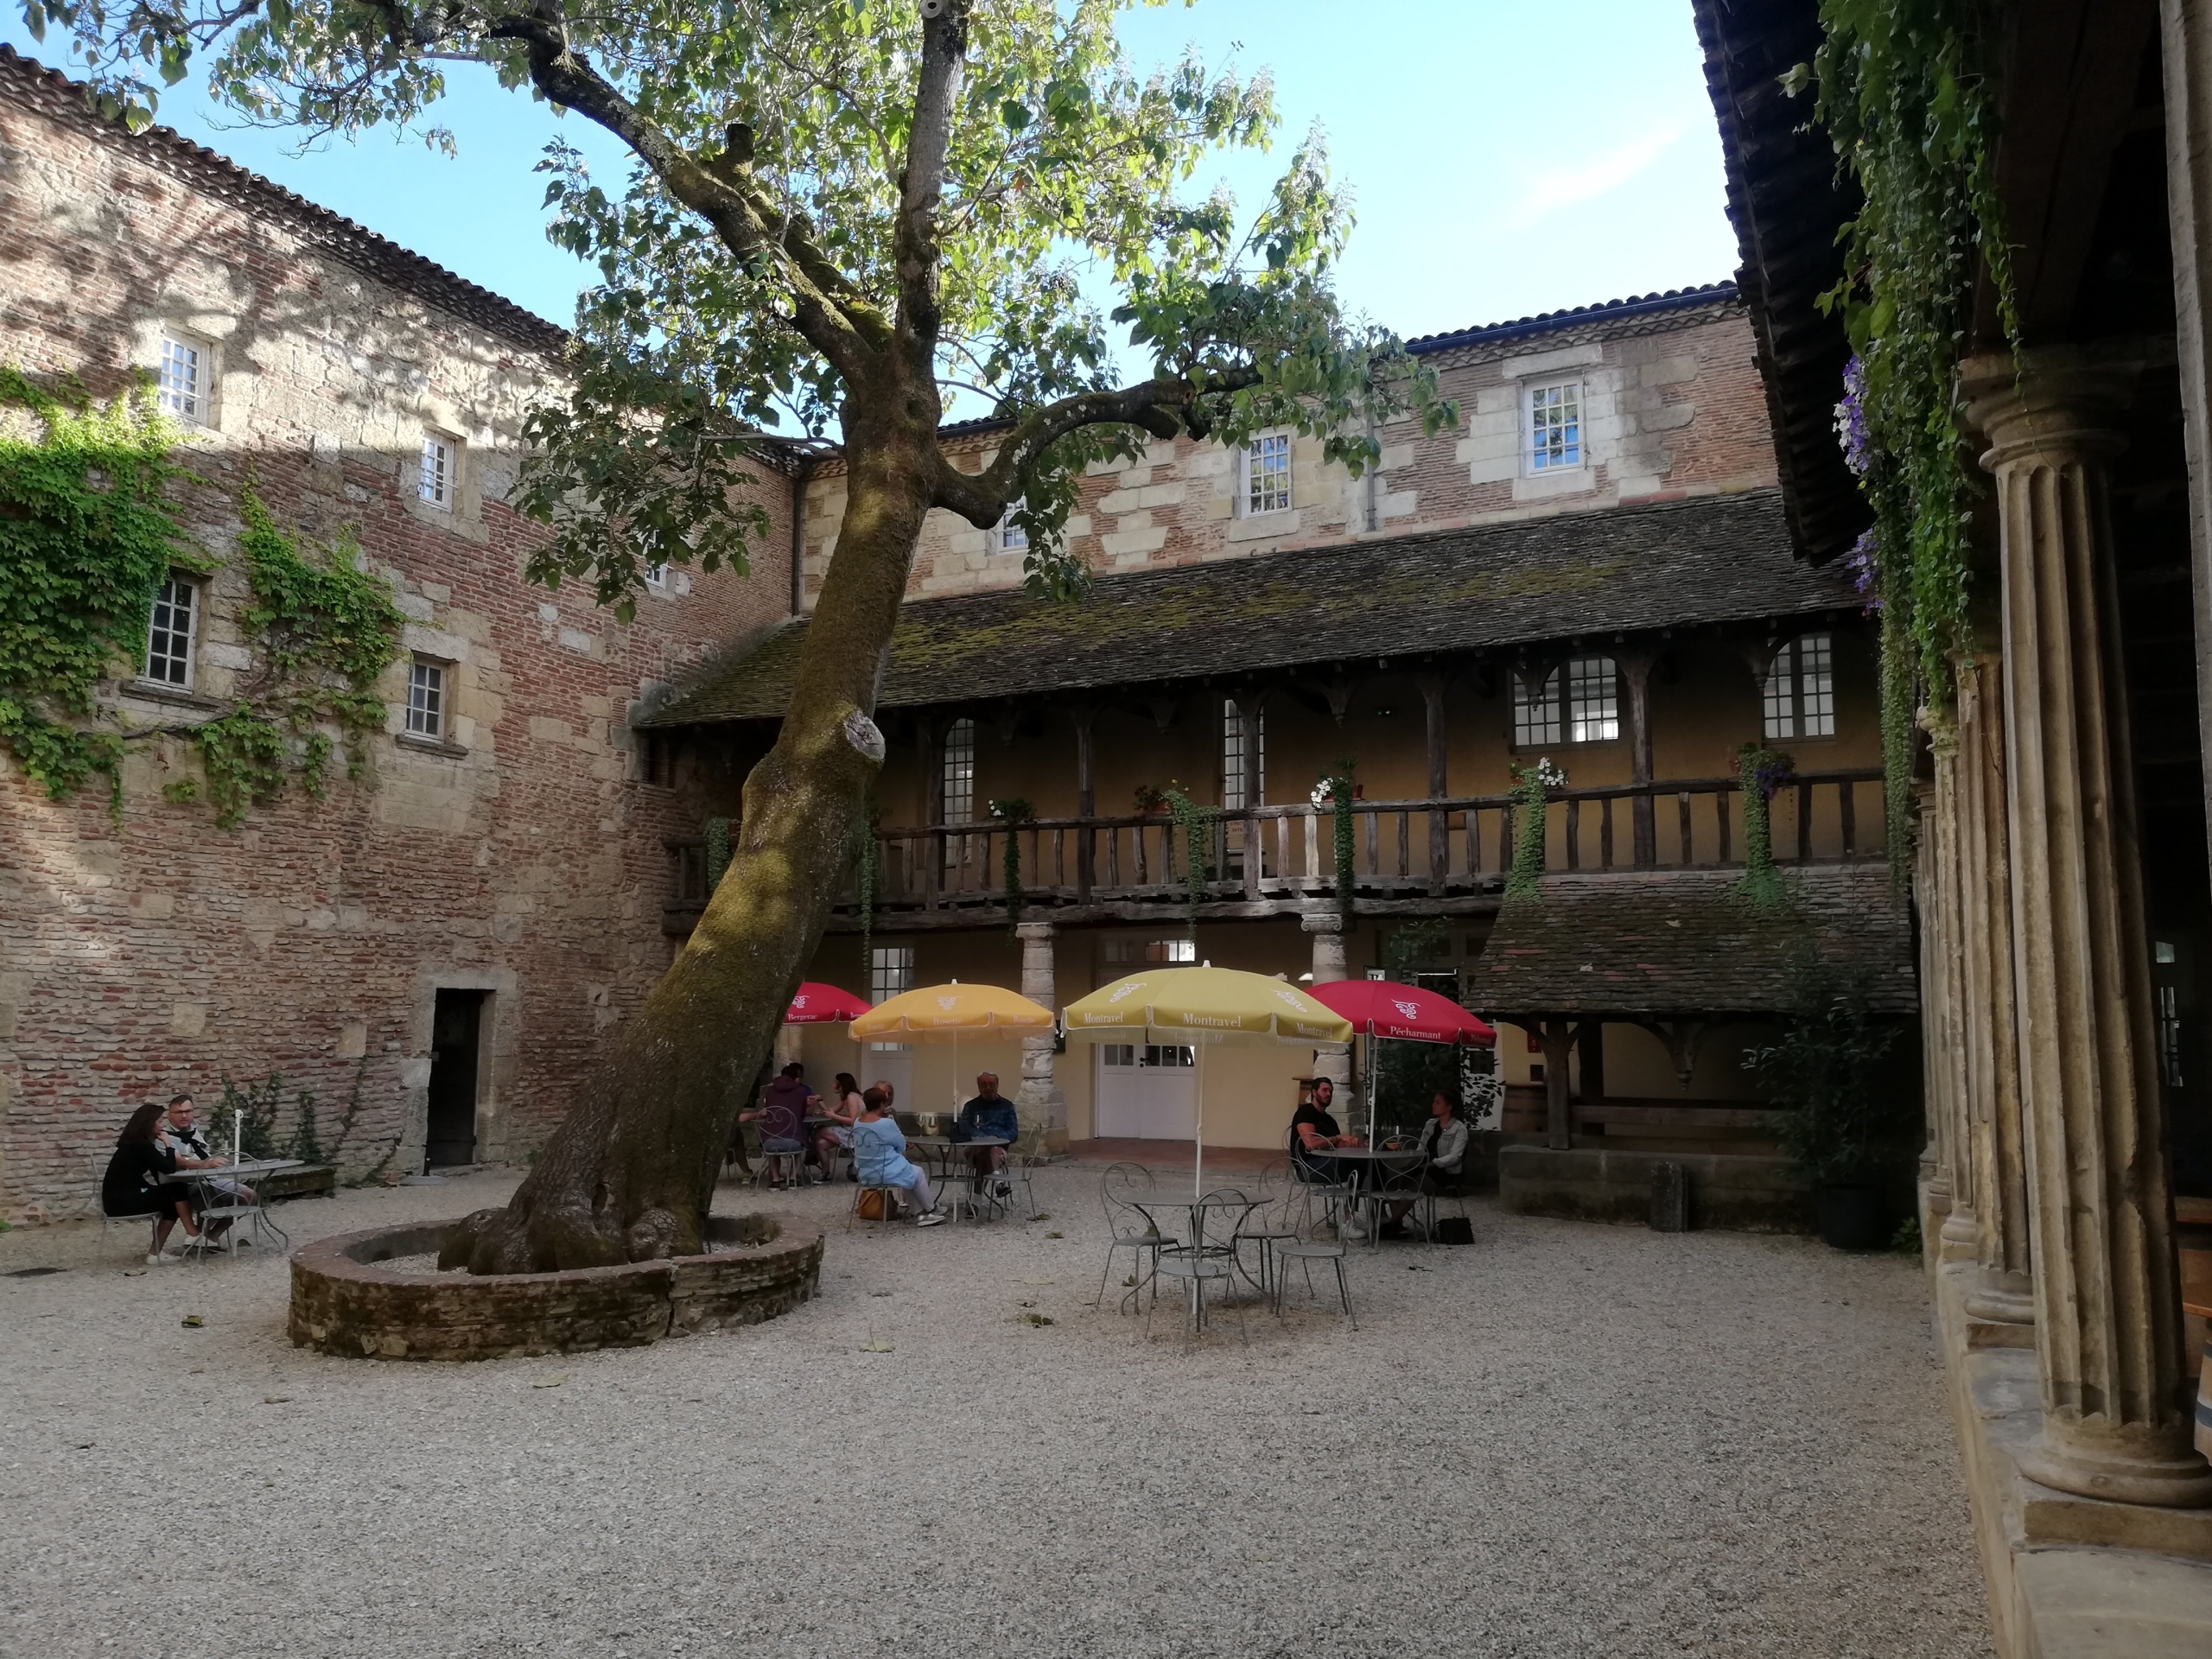 Bergerac travel tips: what to do, what to see, and what to try